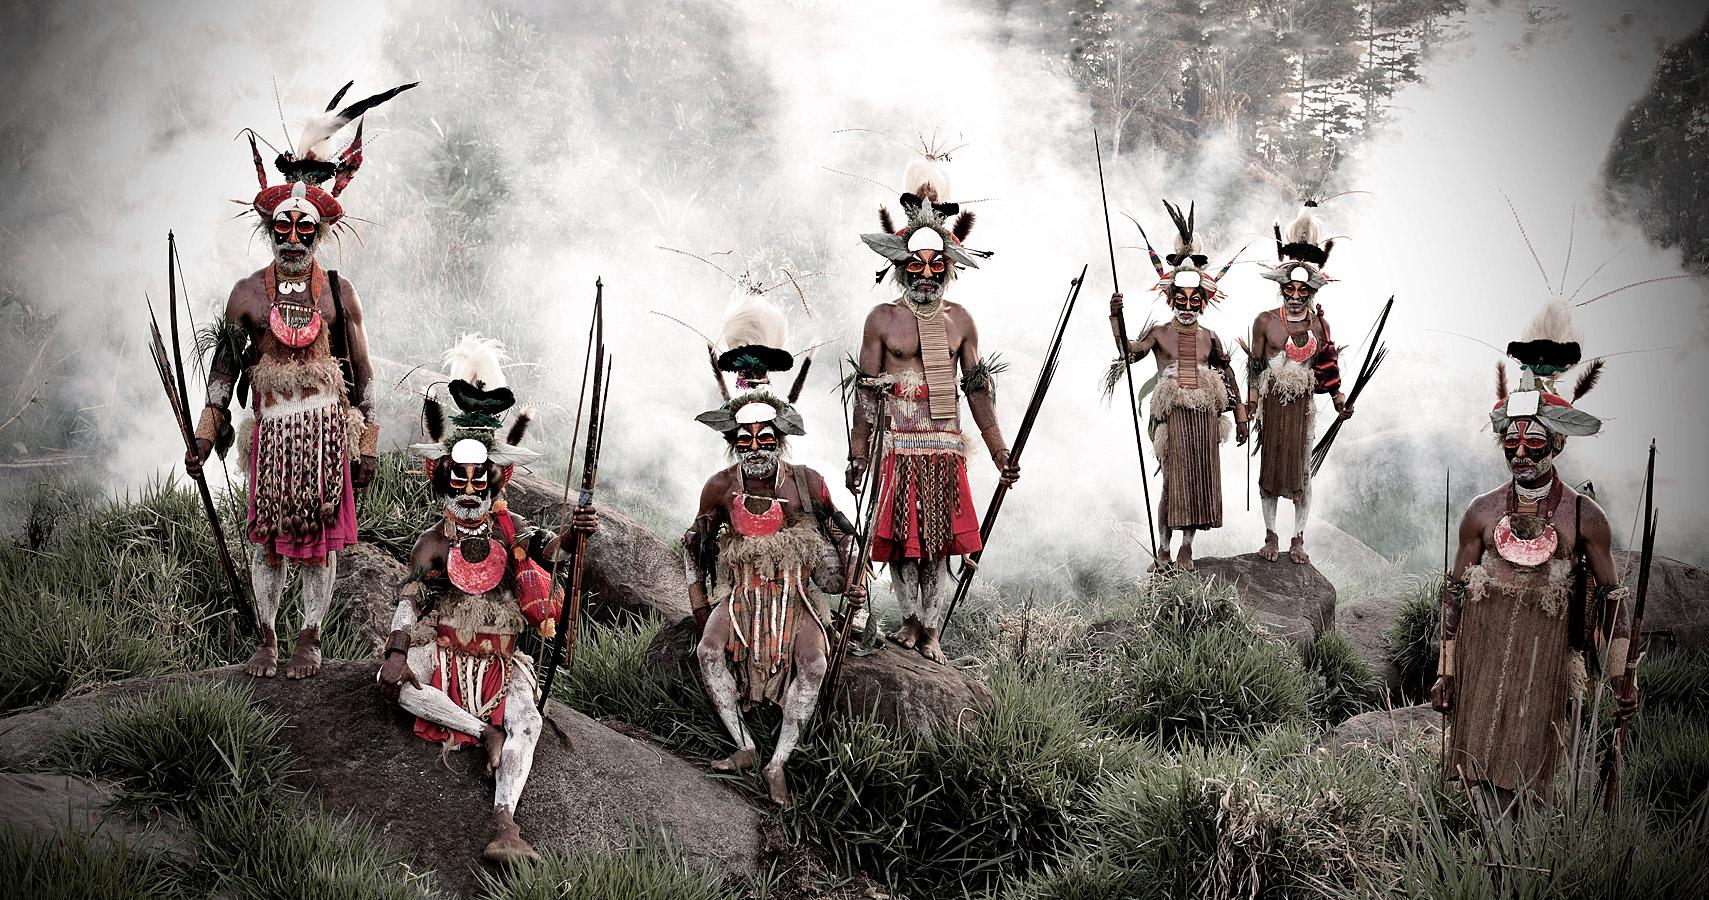 Jimmy Nelson - XV 78 // XV Papua New Guinea, Photography 2010, Printed After